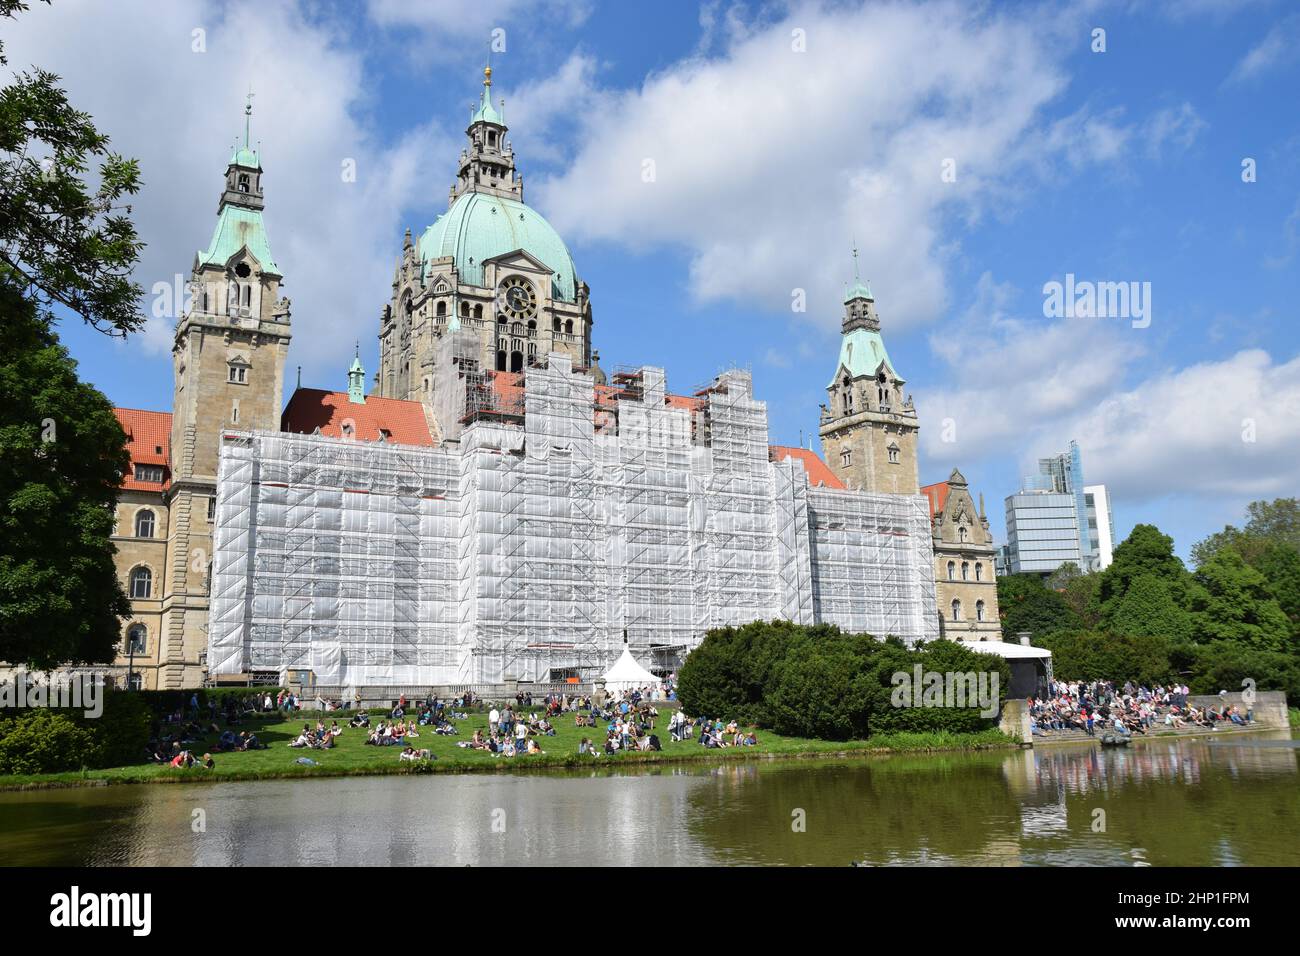 City Hall in Hanover partially covered by scaffolding Stock Photo